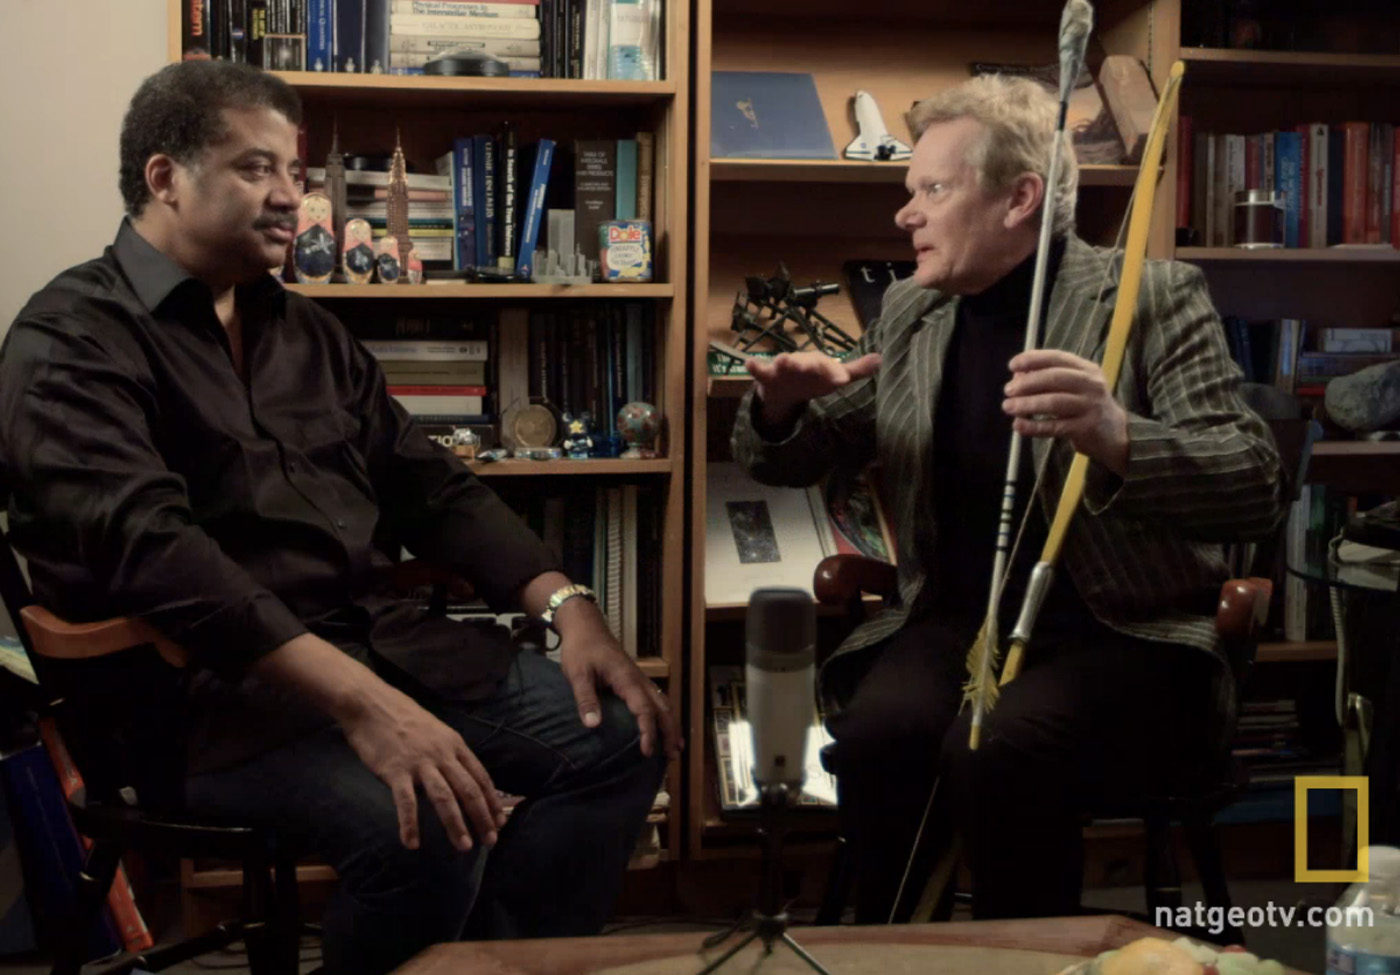 Screen grab from Natinal Geographic Channel showing Neil deGrasse Tyson and Philippe Petit.